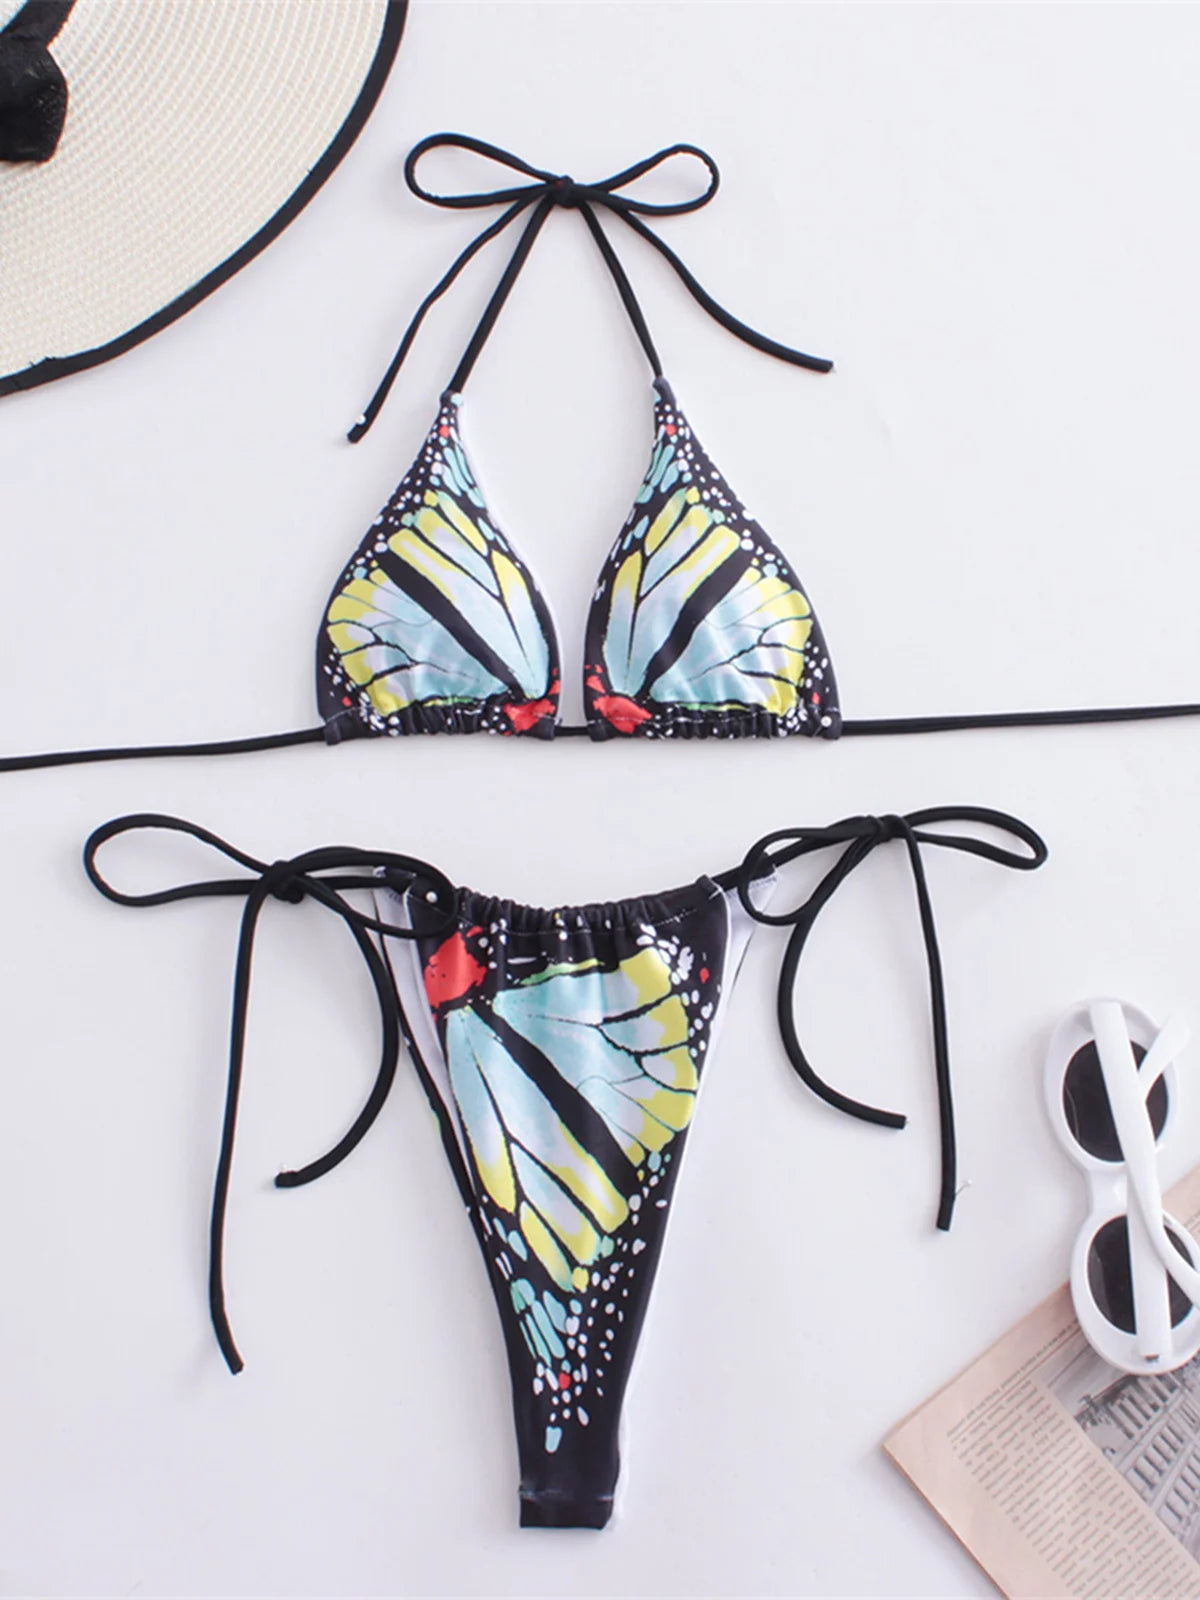 Summer Butterfly Printed Halter Bikini Set in Multiple Colors, Comfortable Two-Piece Swimwear for Women, Fits True to Size, Bikini Designed with Nylon and Spandex for All Day Comfort, Wire Free Low Waist Bikini Set, Ideal for Beach Adventures, Available in Small, Medium, Large Sizes, Offered in Colors Blue, Green, Pink, Red with Butterfly Print, New and In Stock with Free Shipping